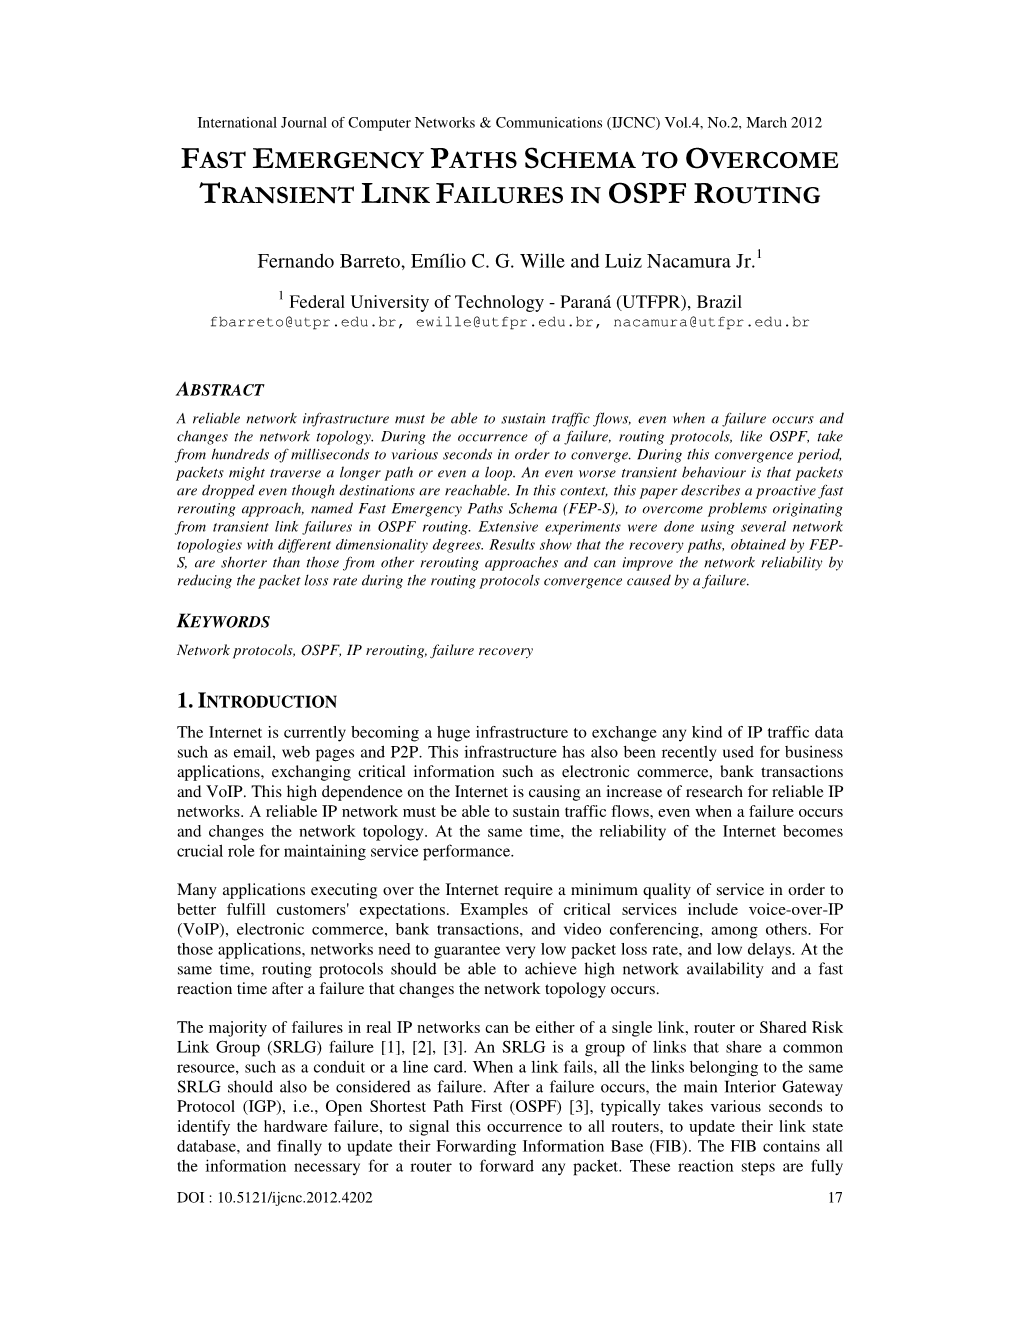 Fast Emergency Paths Schema to Overcome Transient Link Failures in Ospf Routing